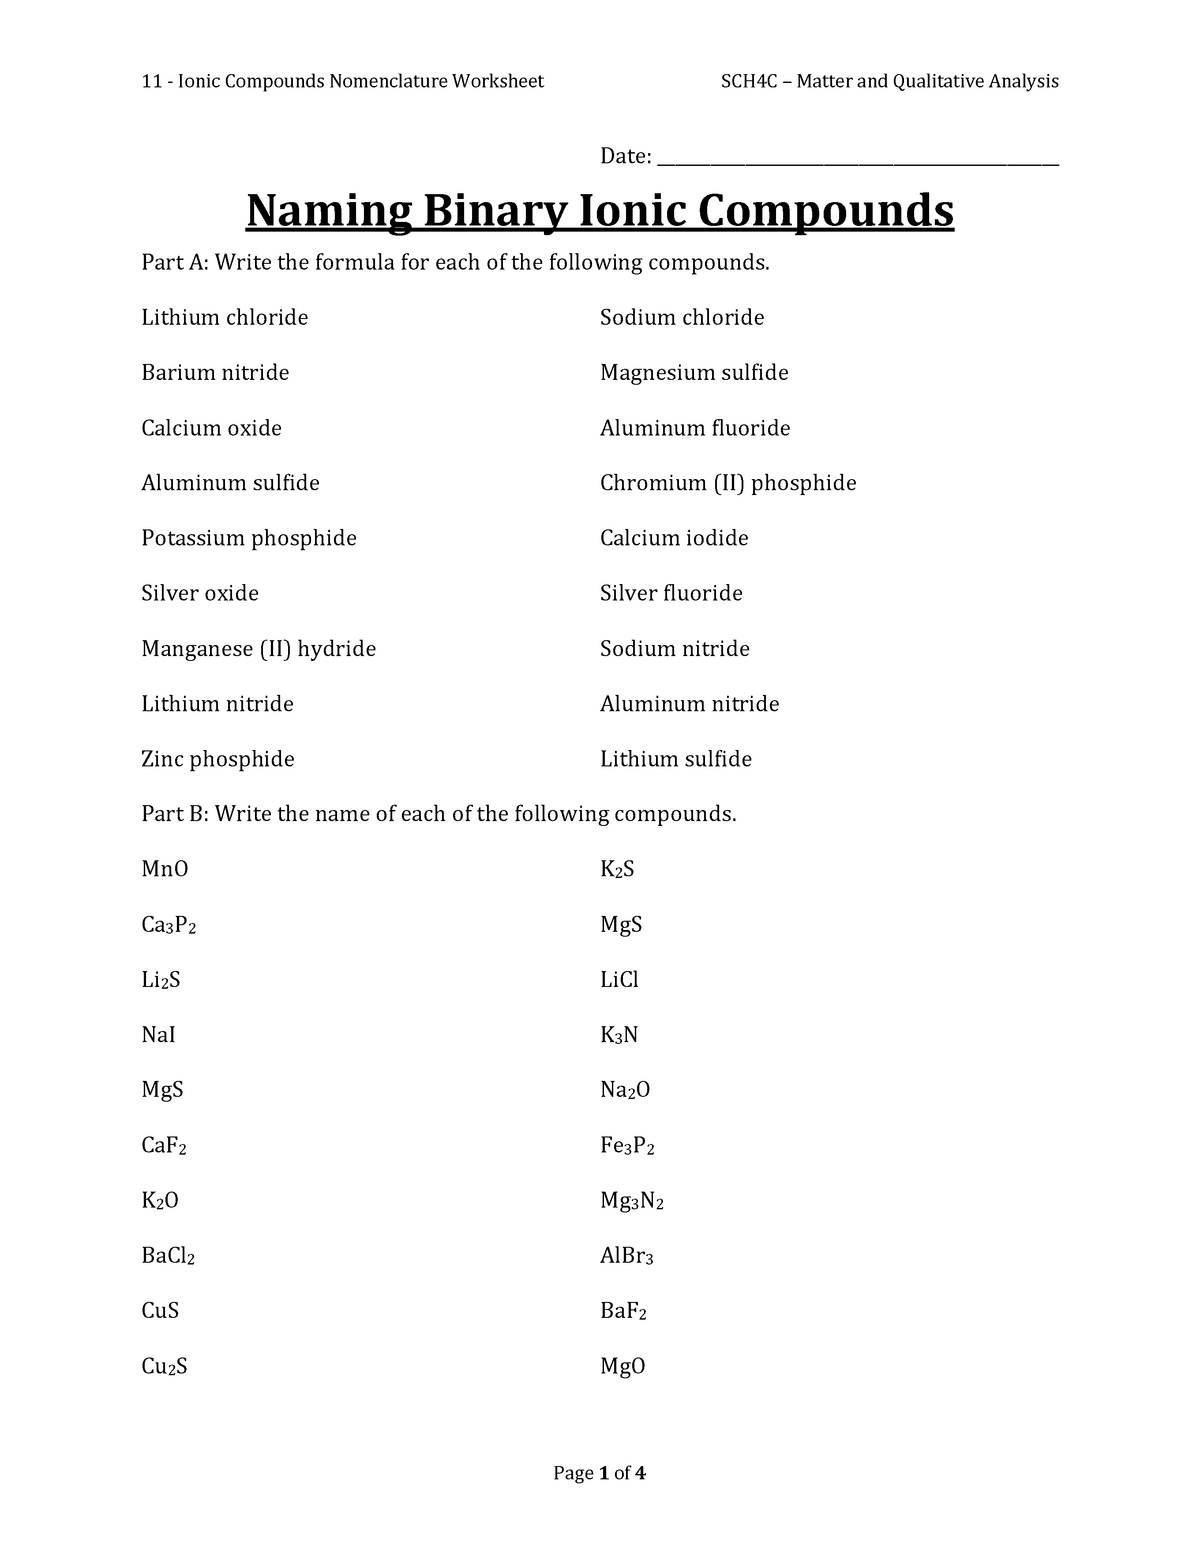 10 - Ionic Compounds Nomenclature Worksheet - Grade 10 - Chemistry Throughout Naming Ionic Compounds Worksheet Answers